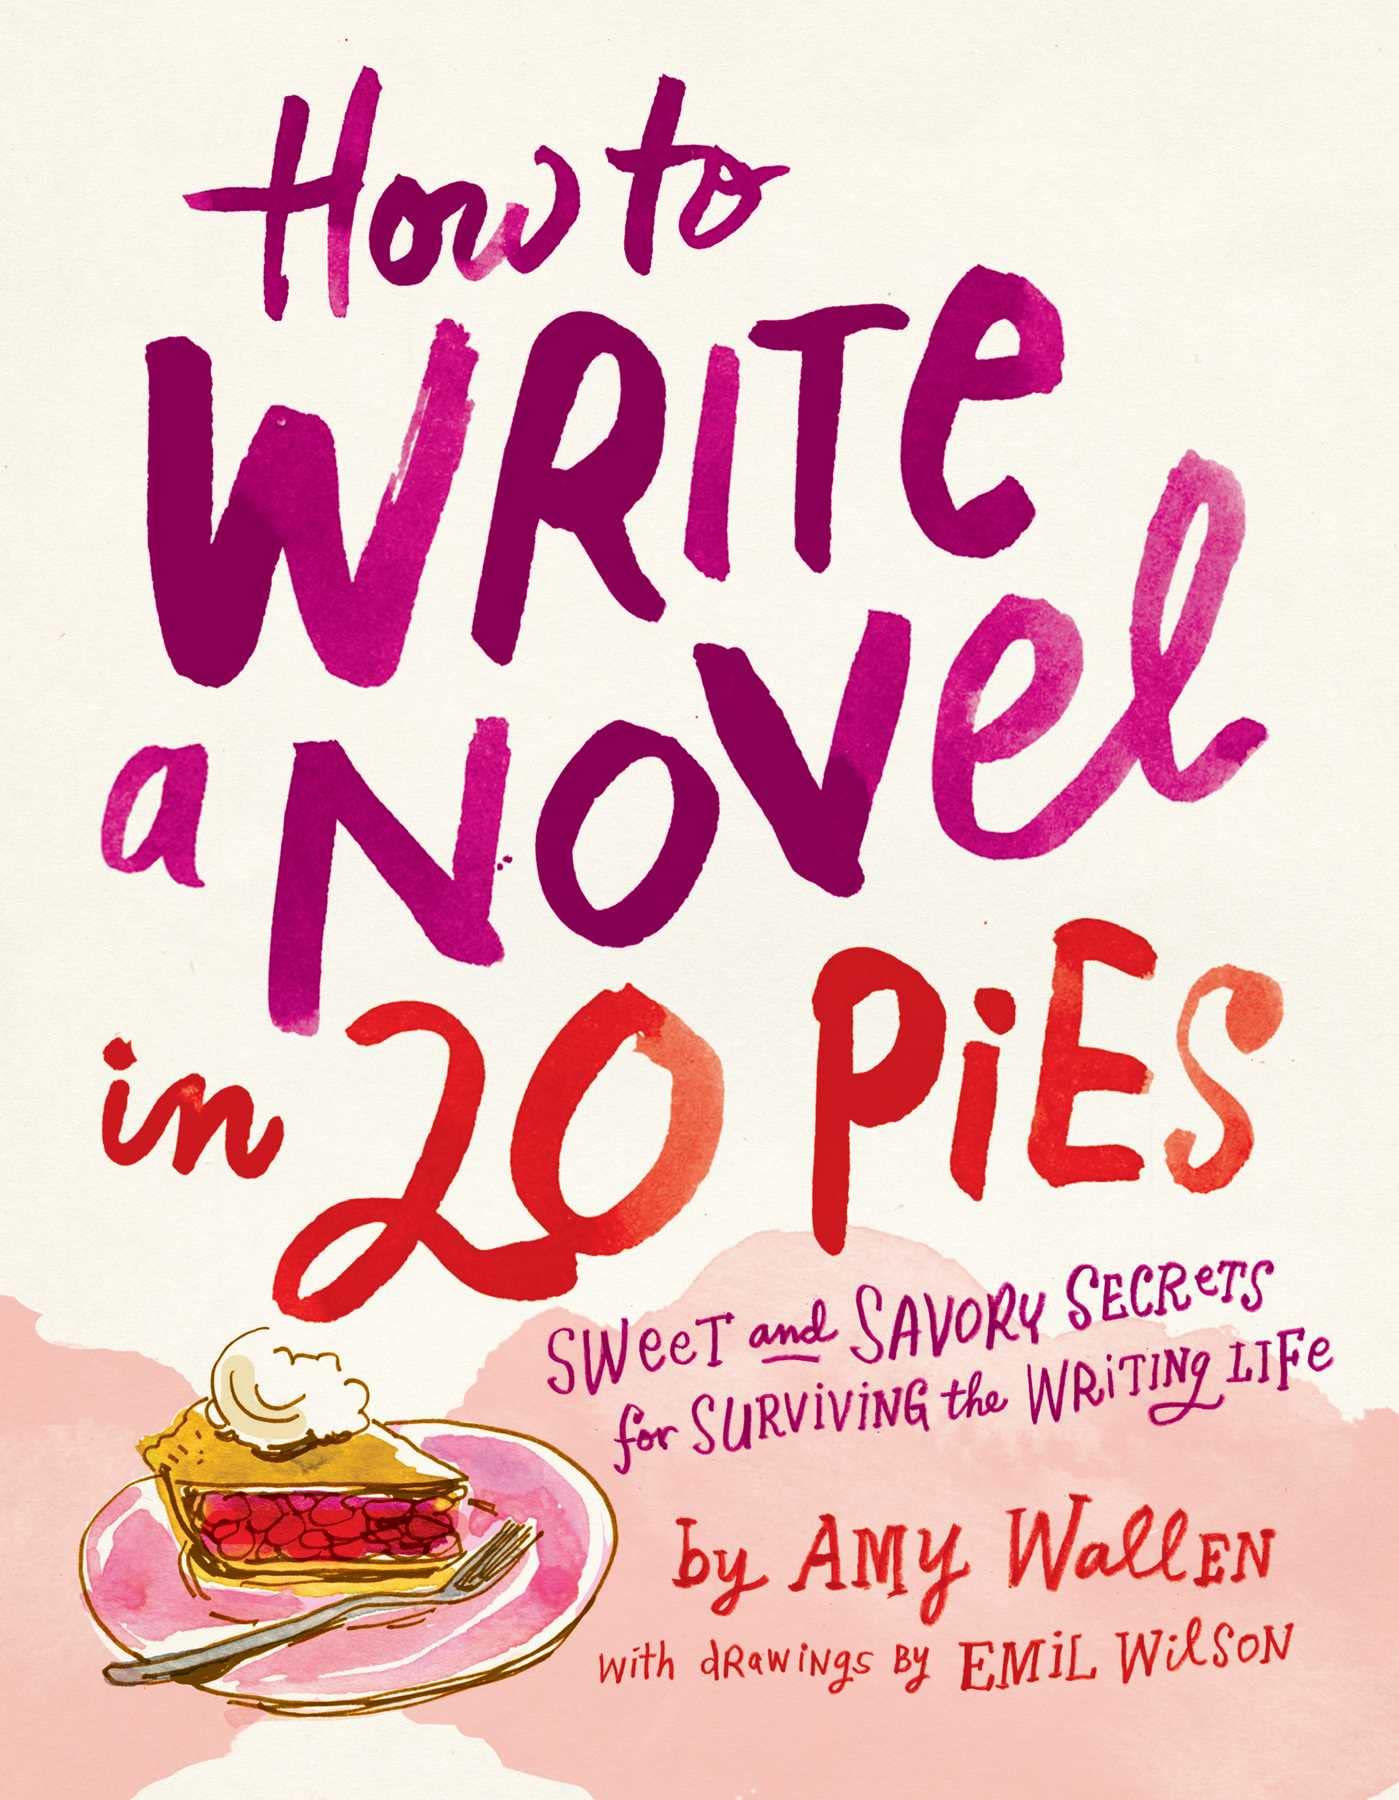 How To Write a Novel in 20 Pies: Sweet and Savory Tips for the Writing Life